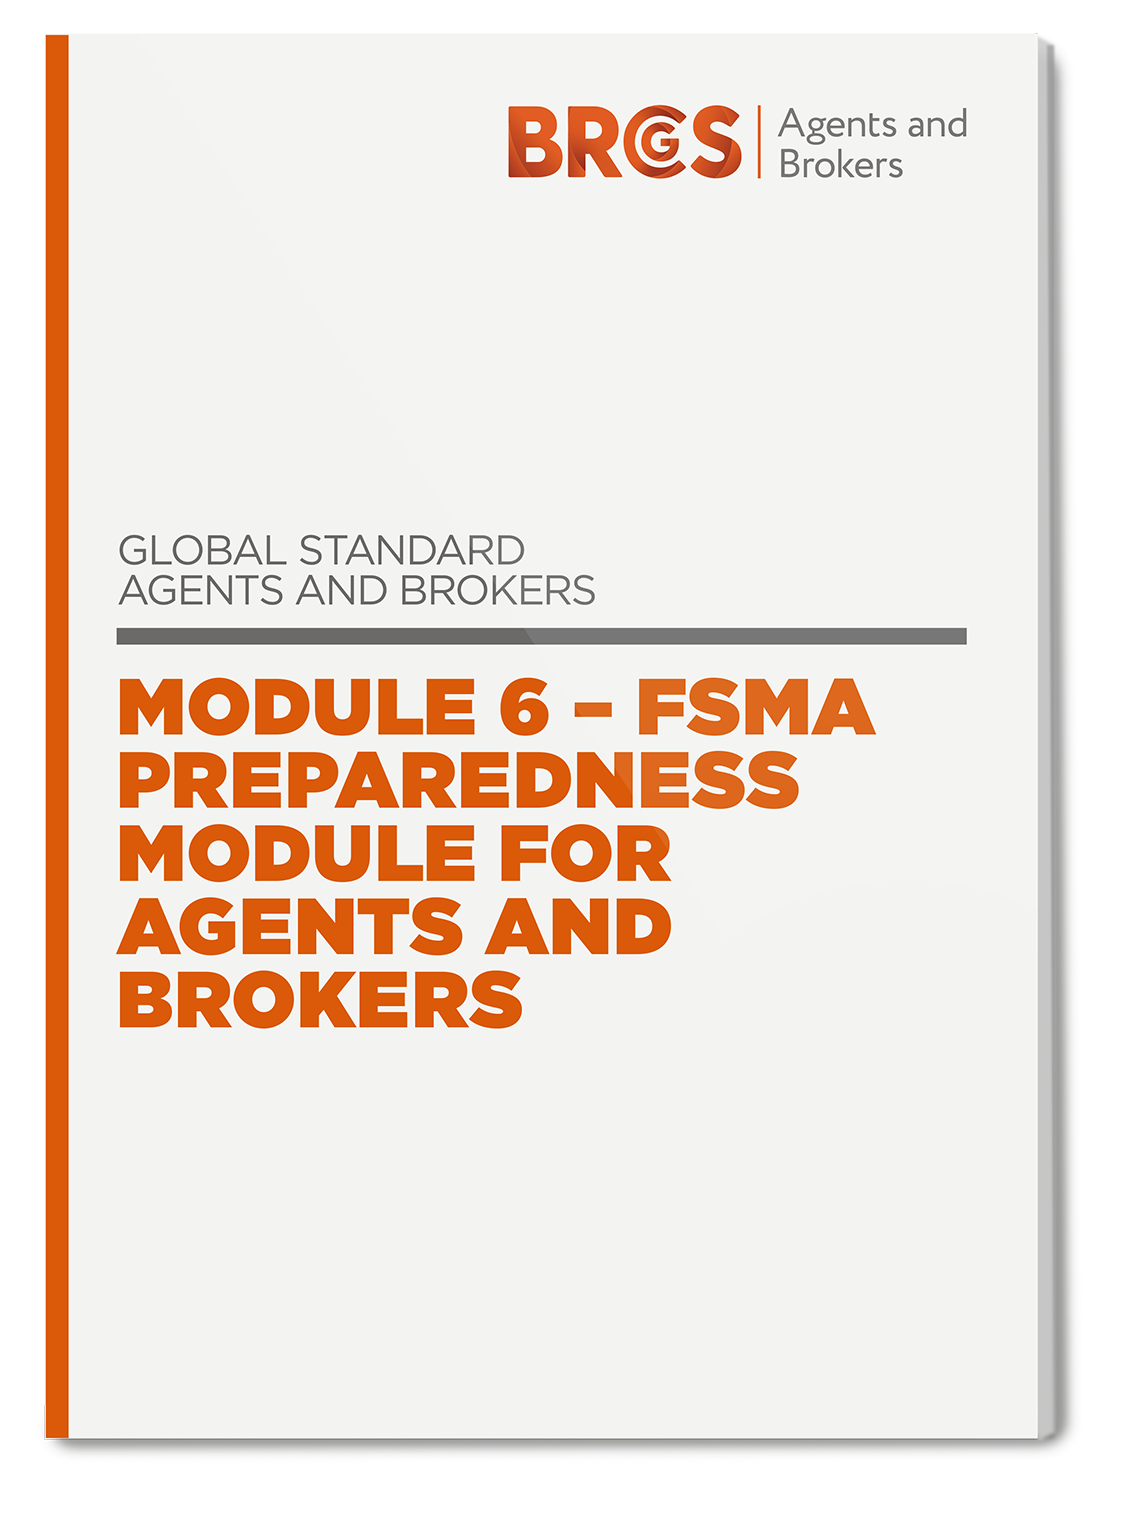 FSMA for Agents and Brokers